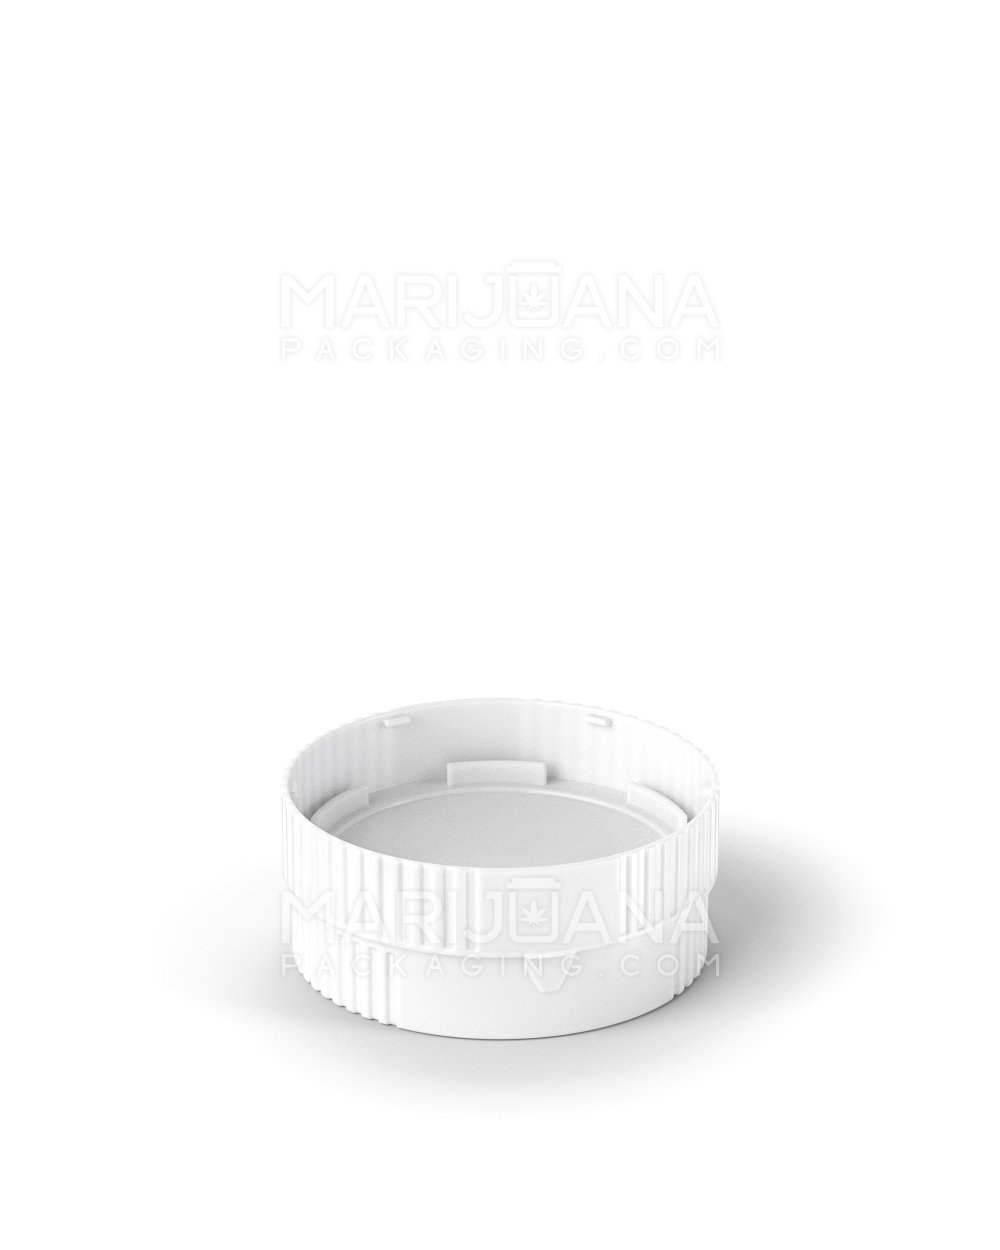 Child Resistant | Push & Turn Vial with Grinder Cap | 40dr - White Plastic - 150 Count - 10